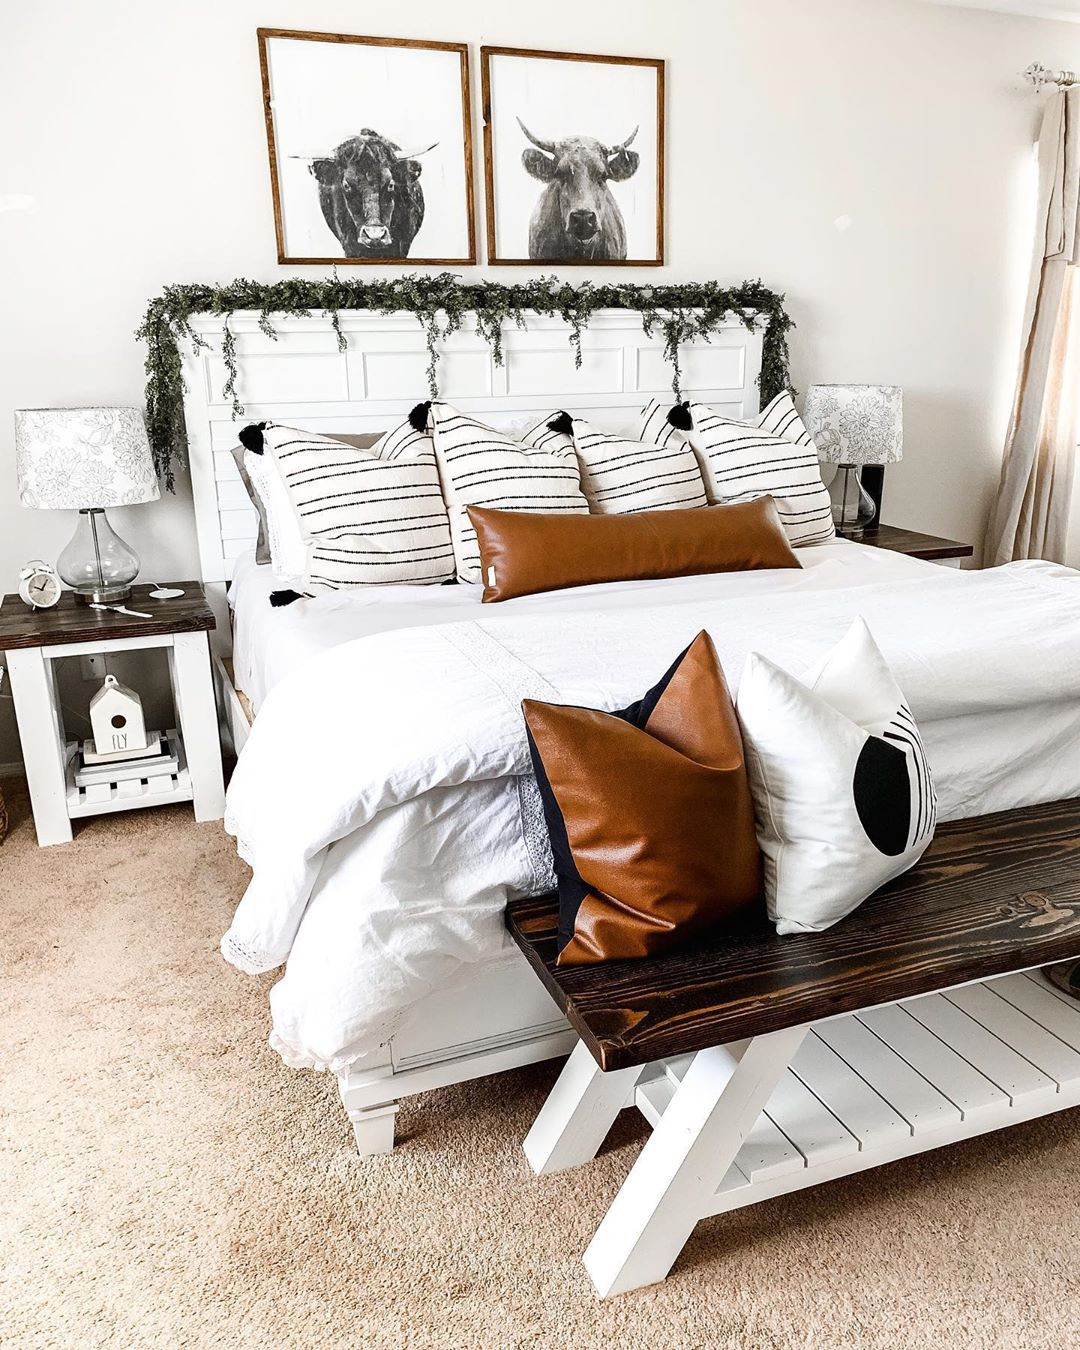 50 Decor Ideas to Transform Your Master Bedroom Into a Haven